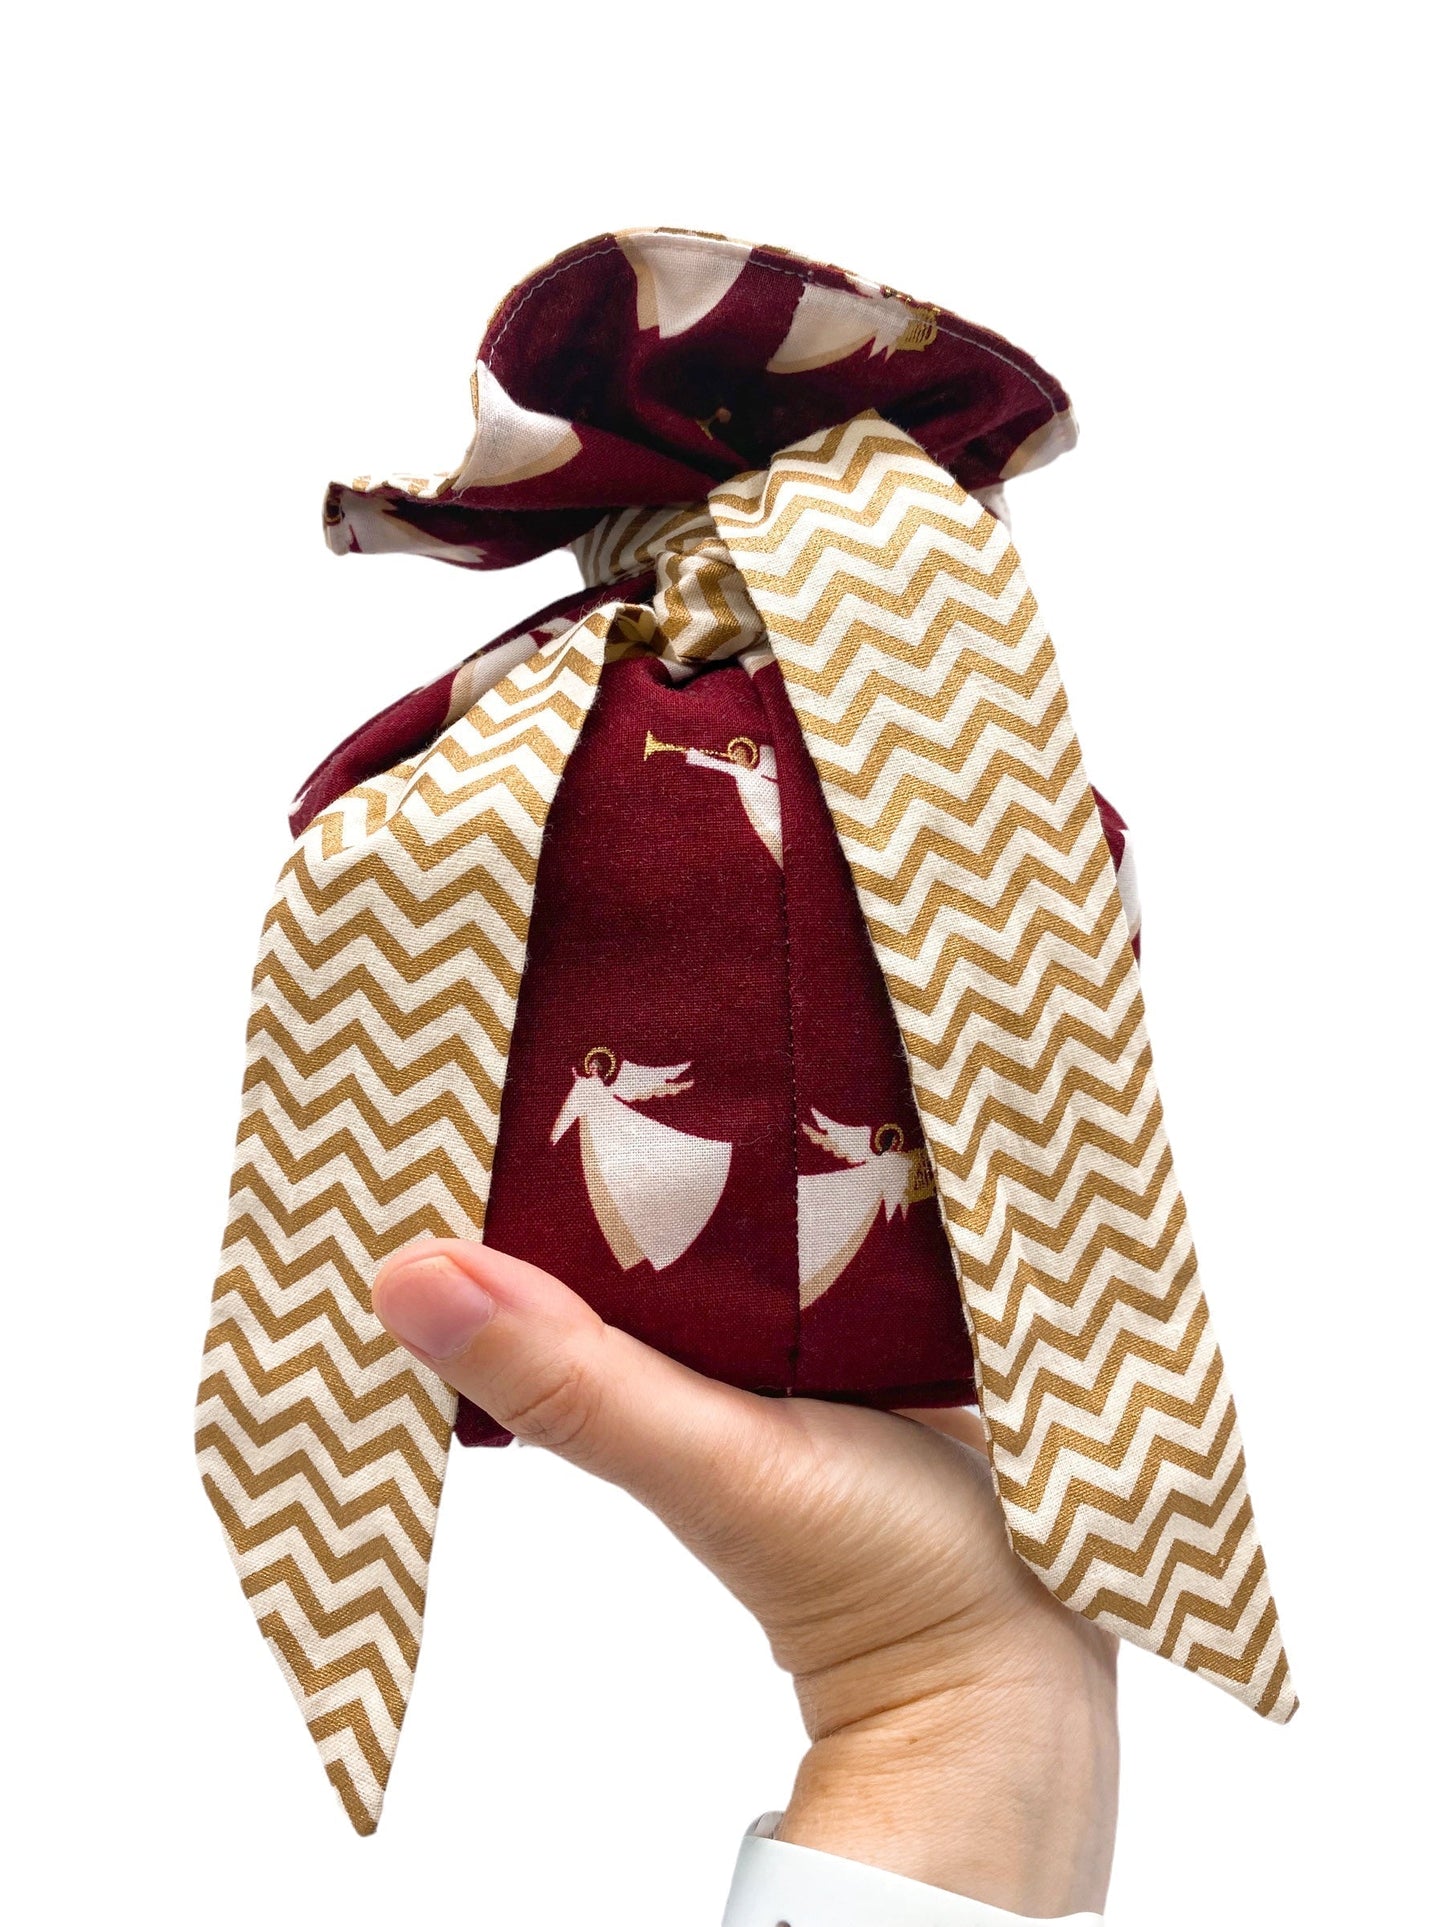 Just Right Gift Bag - Bunting - Pink/Yellow Accents